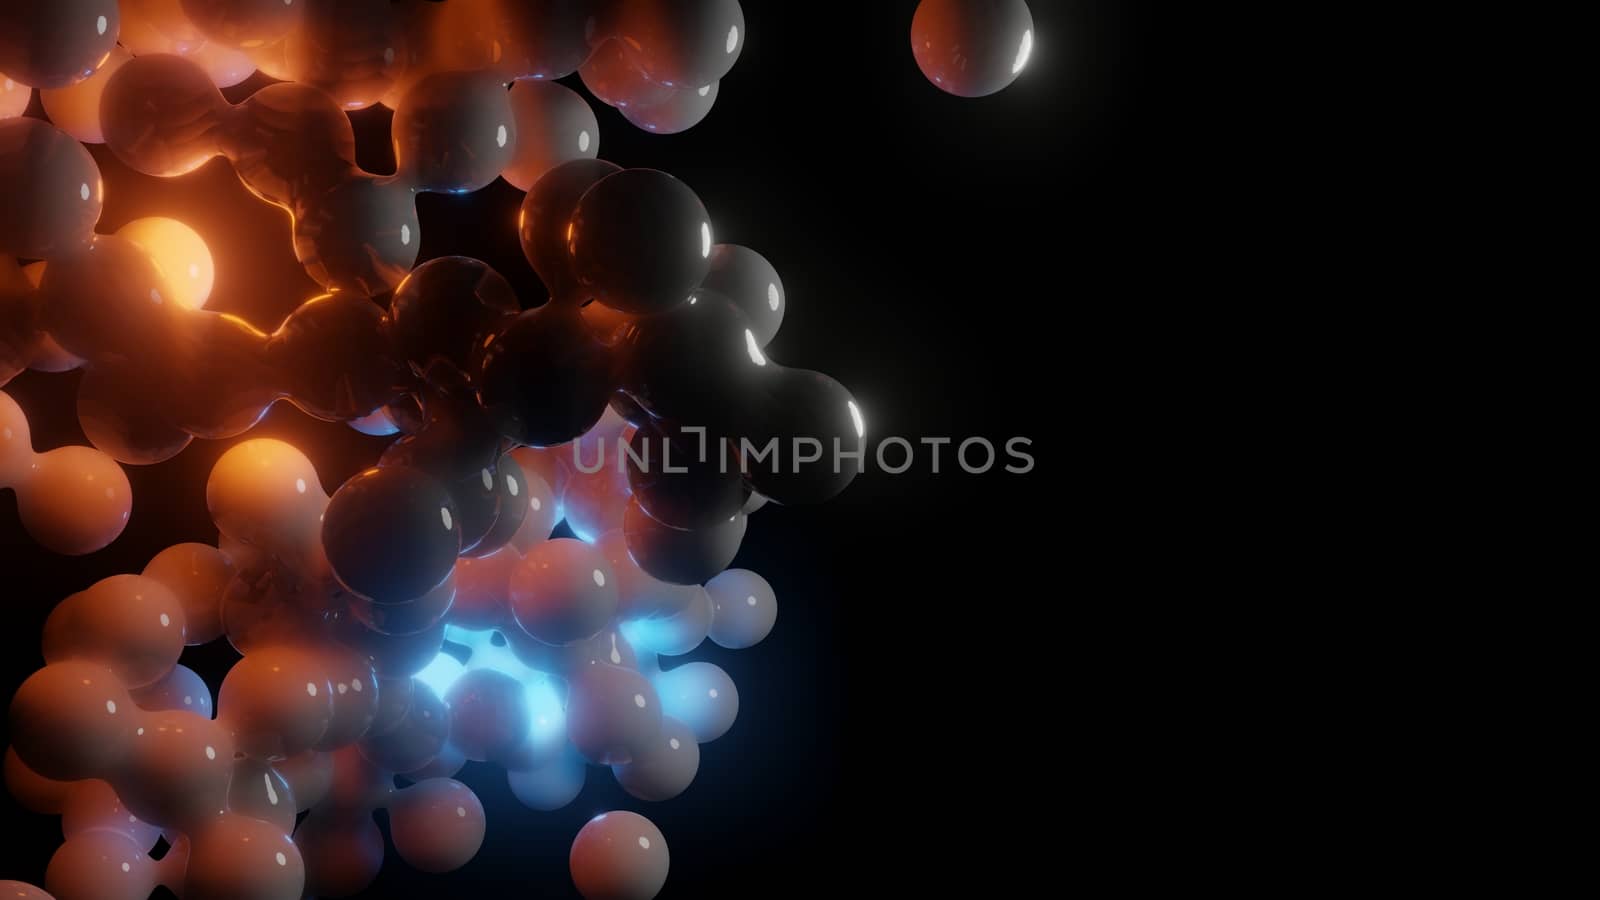 White chaotic spheres and flashes of red and blue light. Abstract 3d illustration for your design